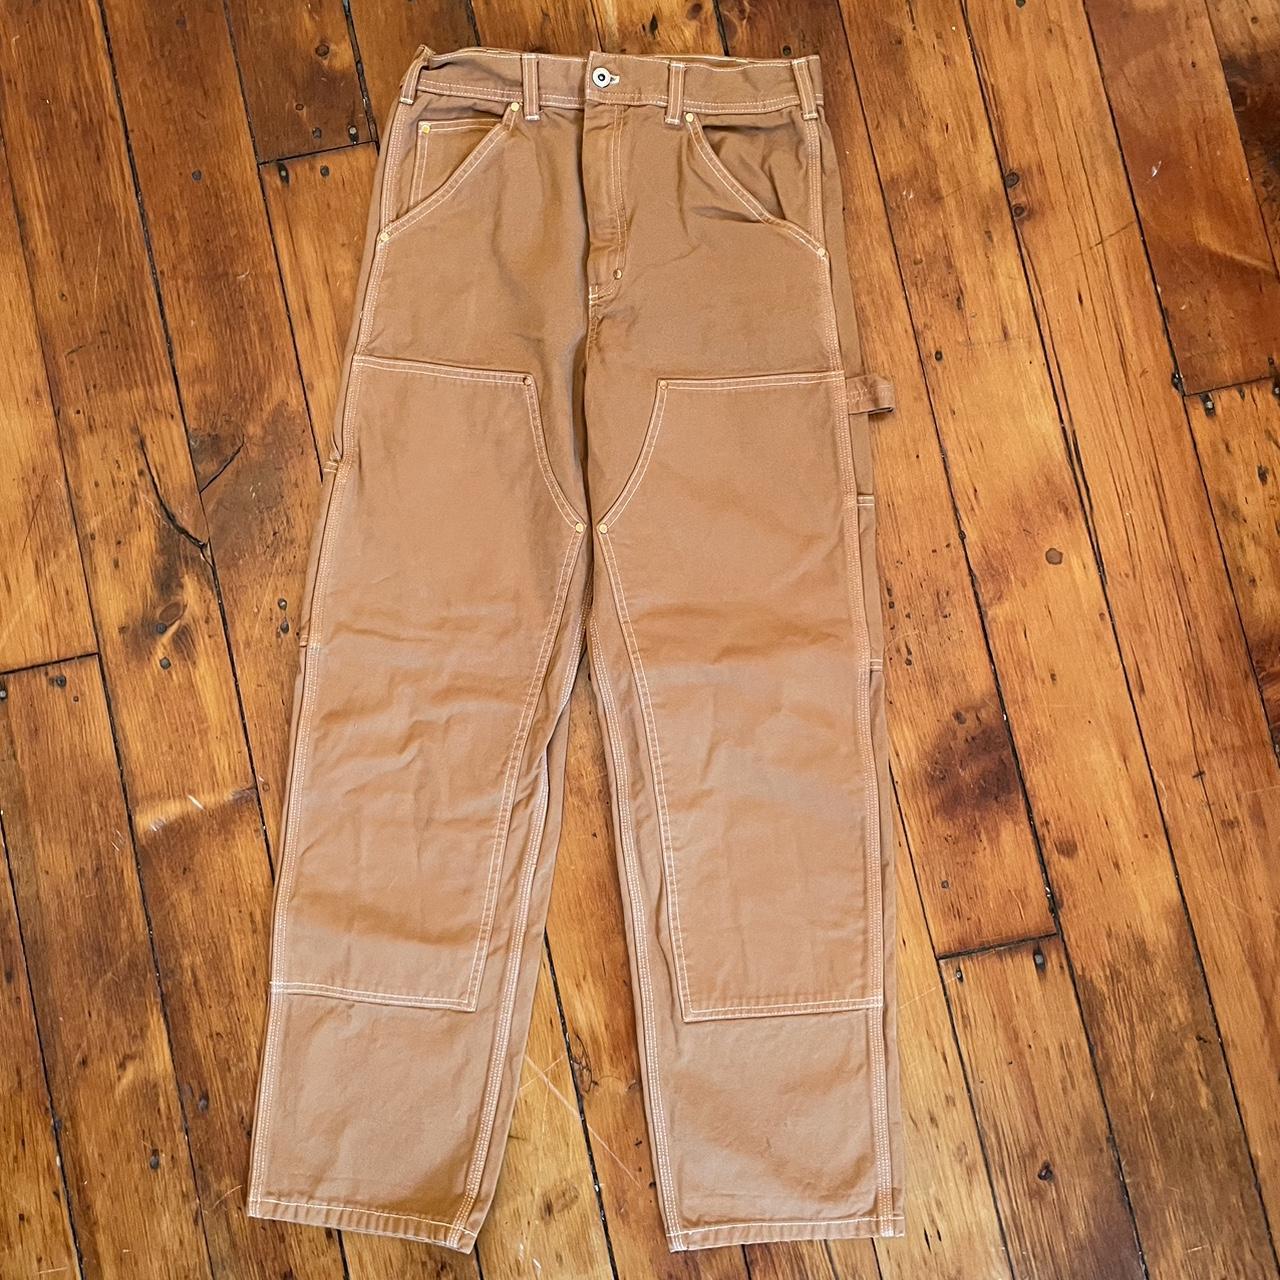 Product Image 1 - Stan Ray double knee pants